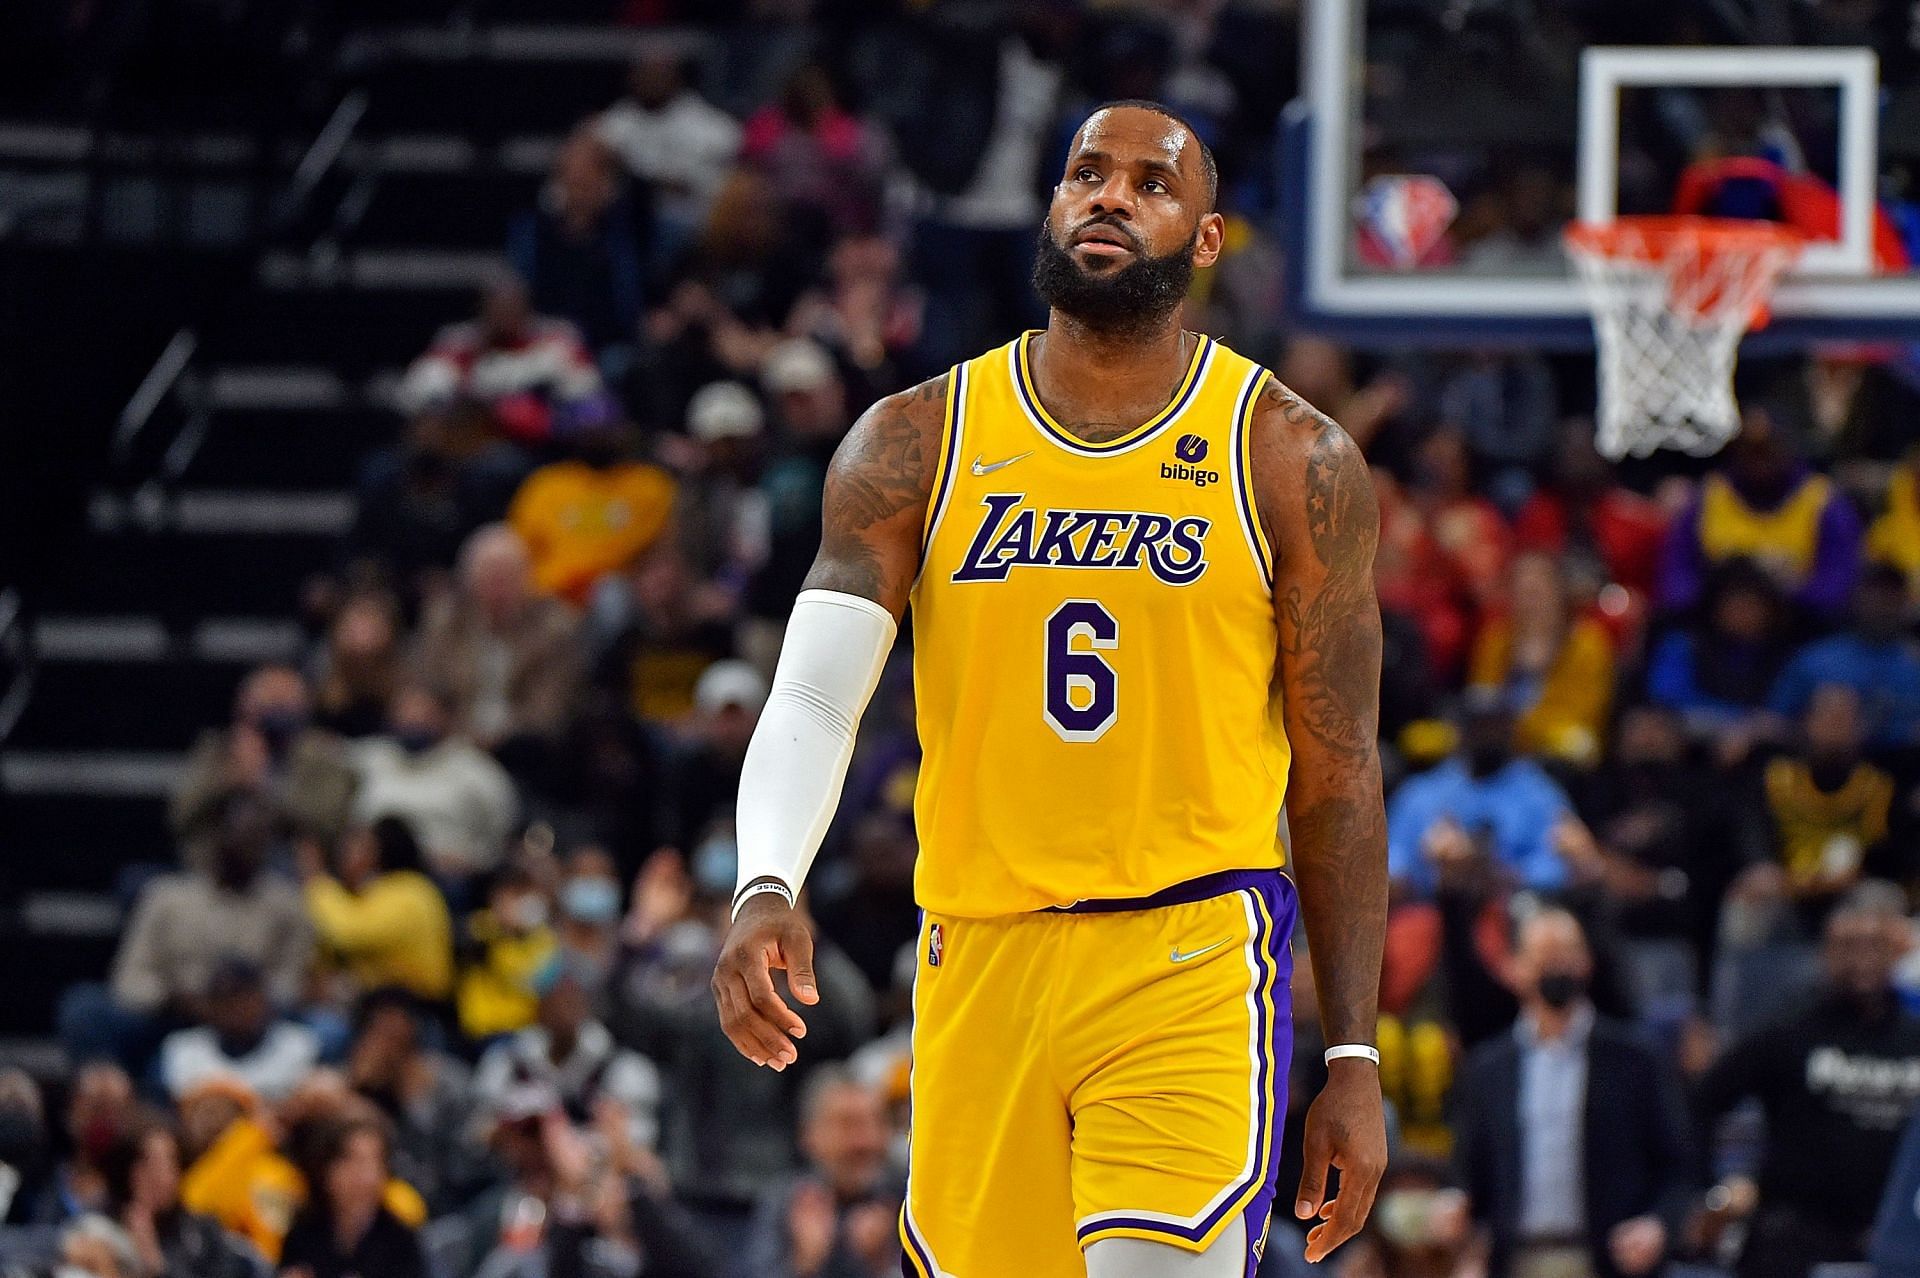 LA Lakers superstar LeBron James became the fifth player in NBA history to record 100 triple-doubles on Thursday